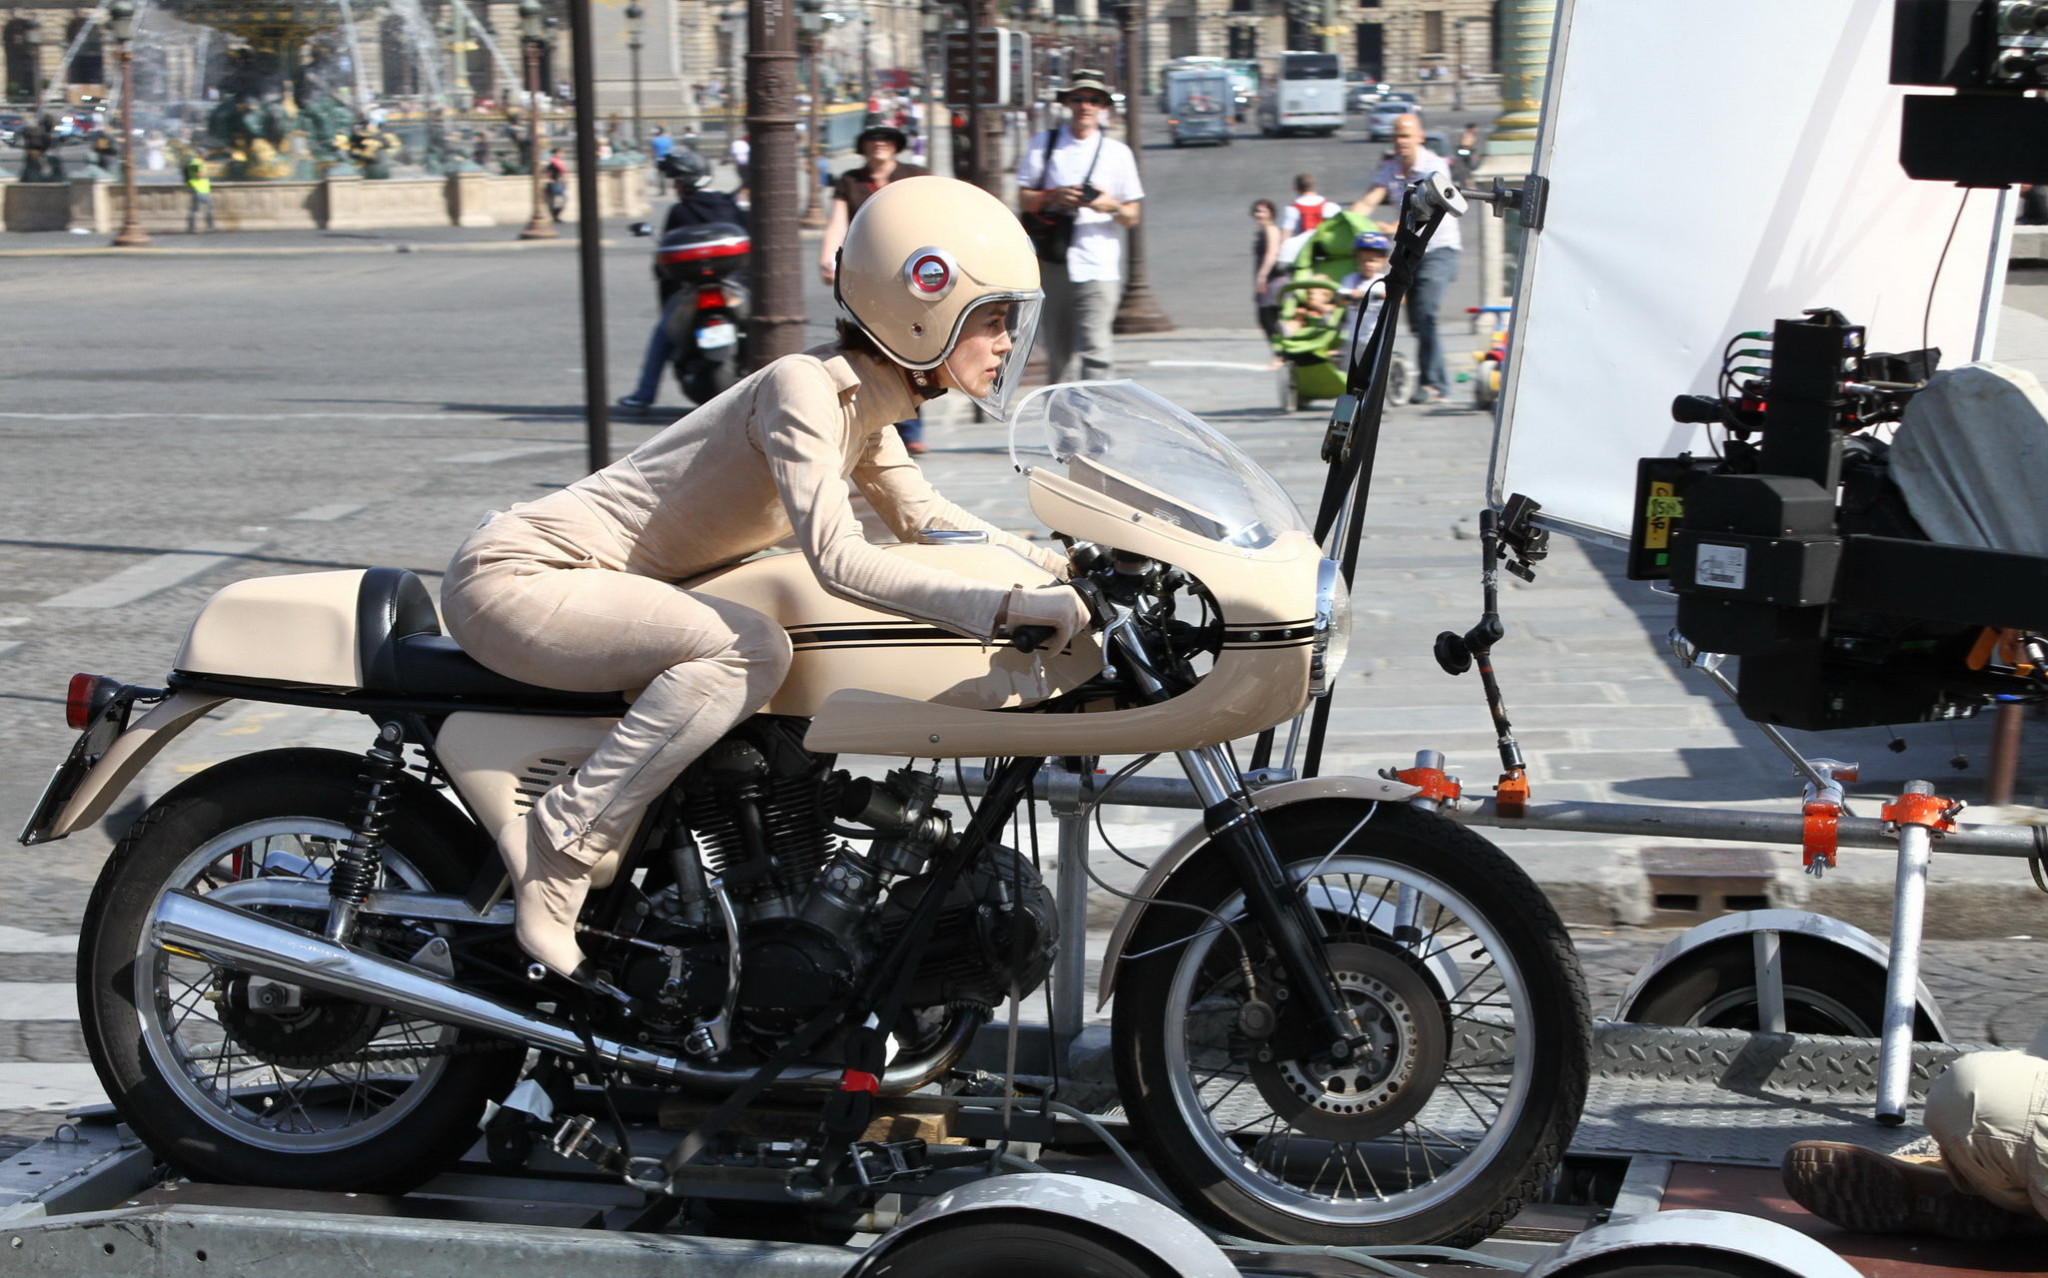 Keira Knightley in tight retro motorcycle suit shooting a commercial in Paris #75334782